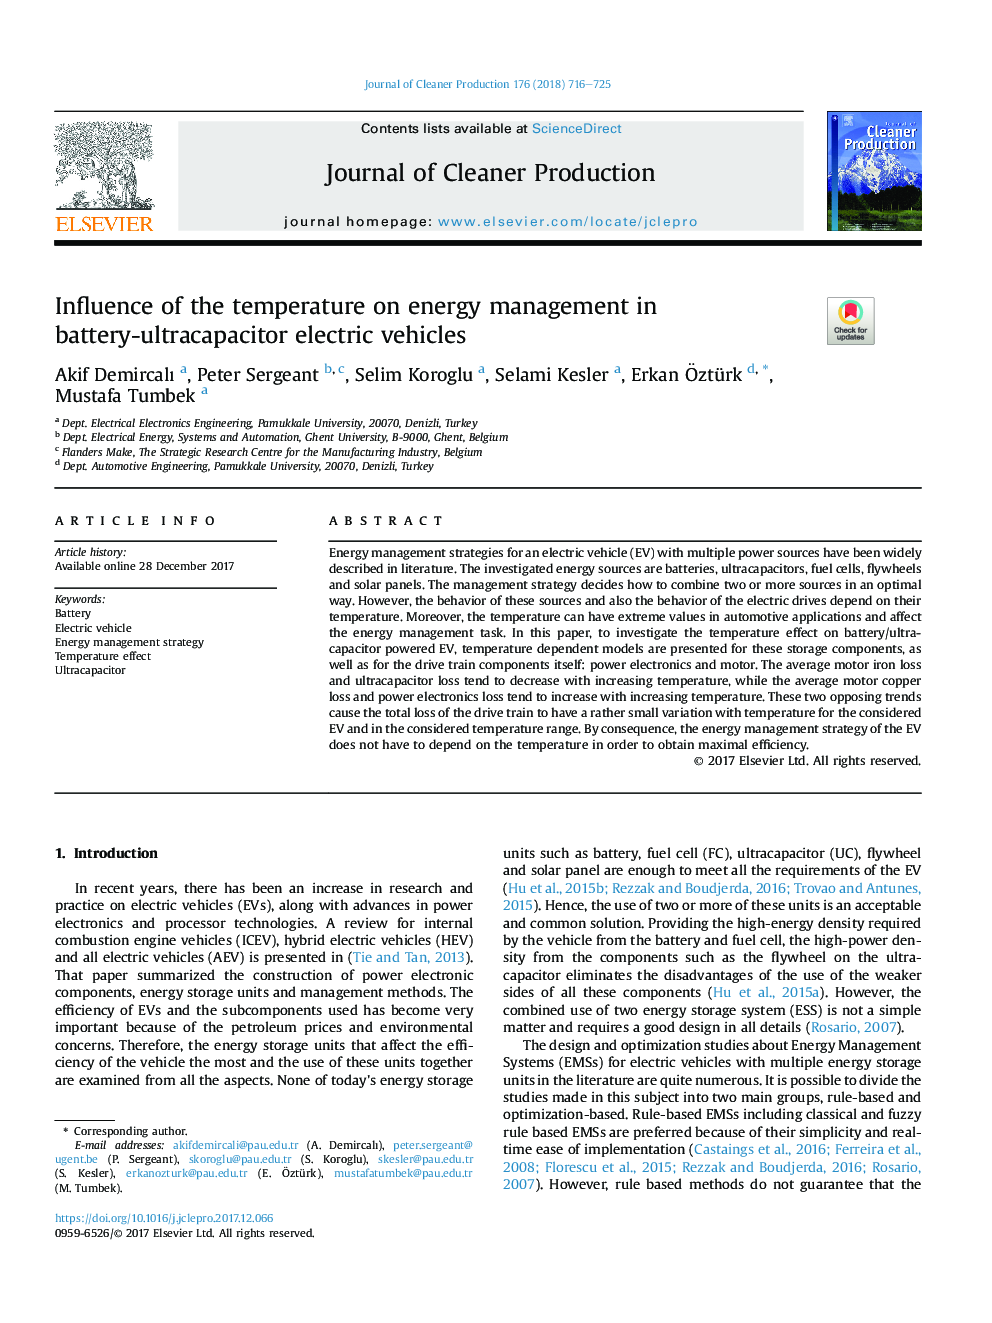 Influence of the temperature on energy management in battery-ultracapacitor electric vehicles